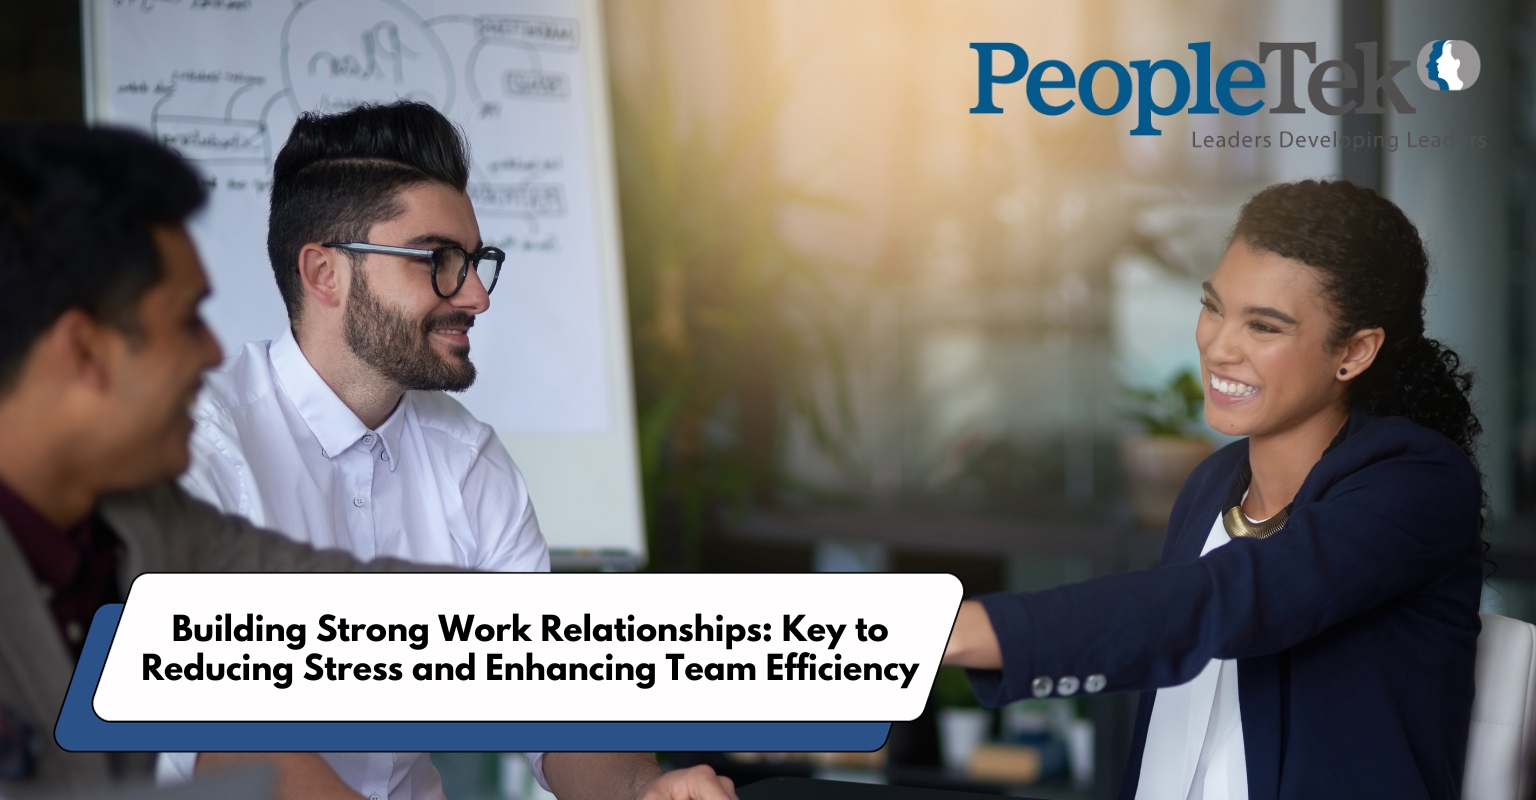 Building Strong Work Relationships: Key to Reducing Stress and Enhancing Team Efficiency